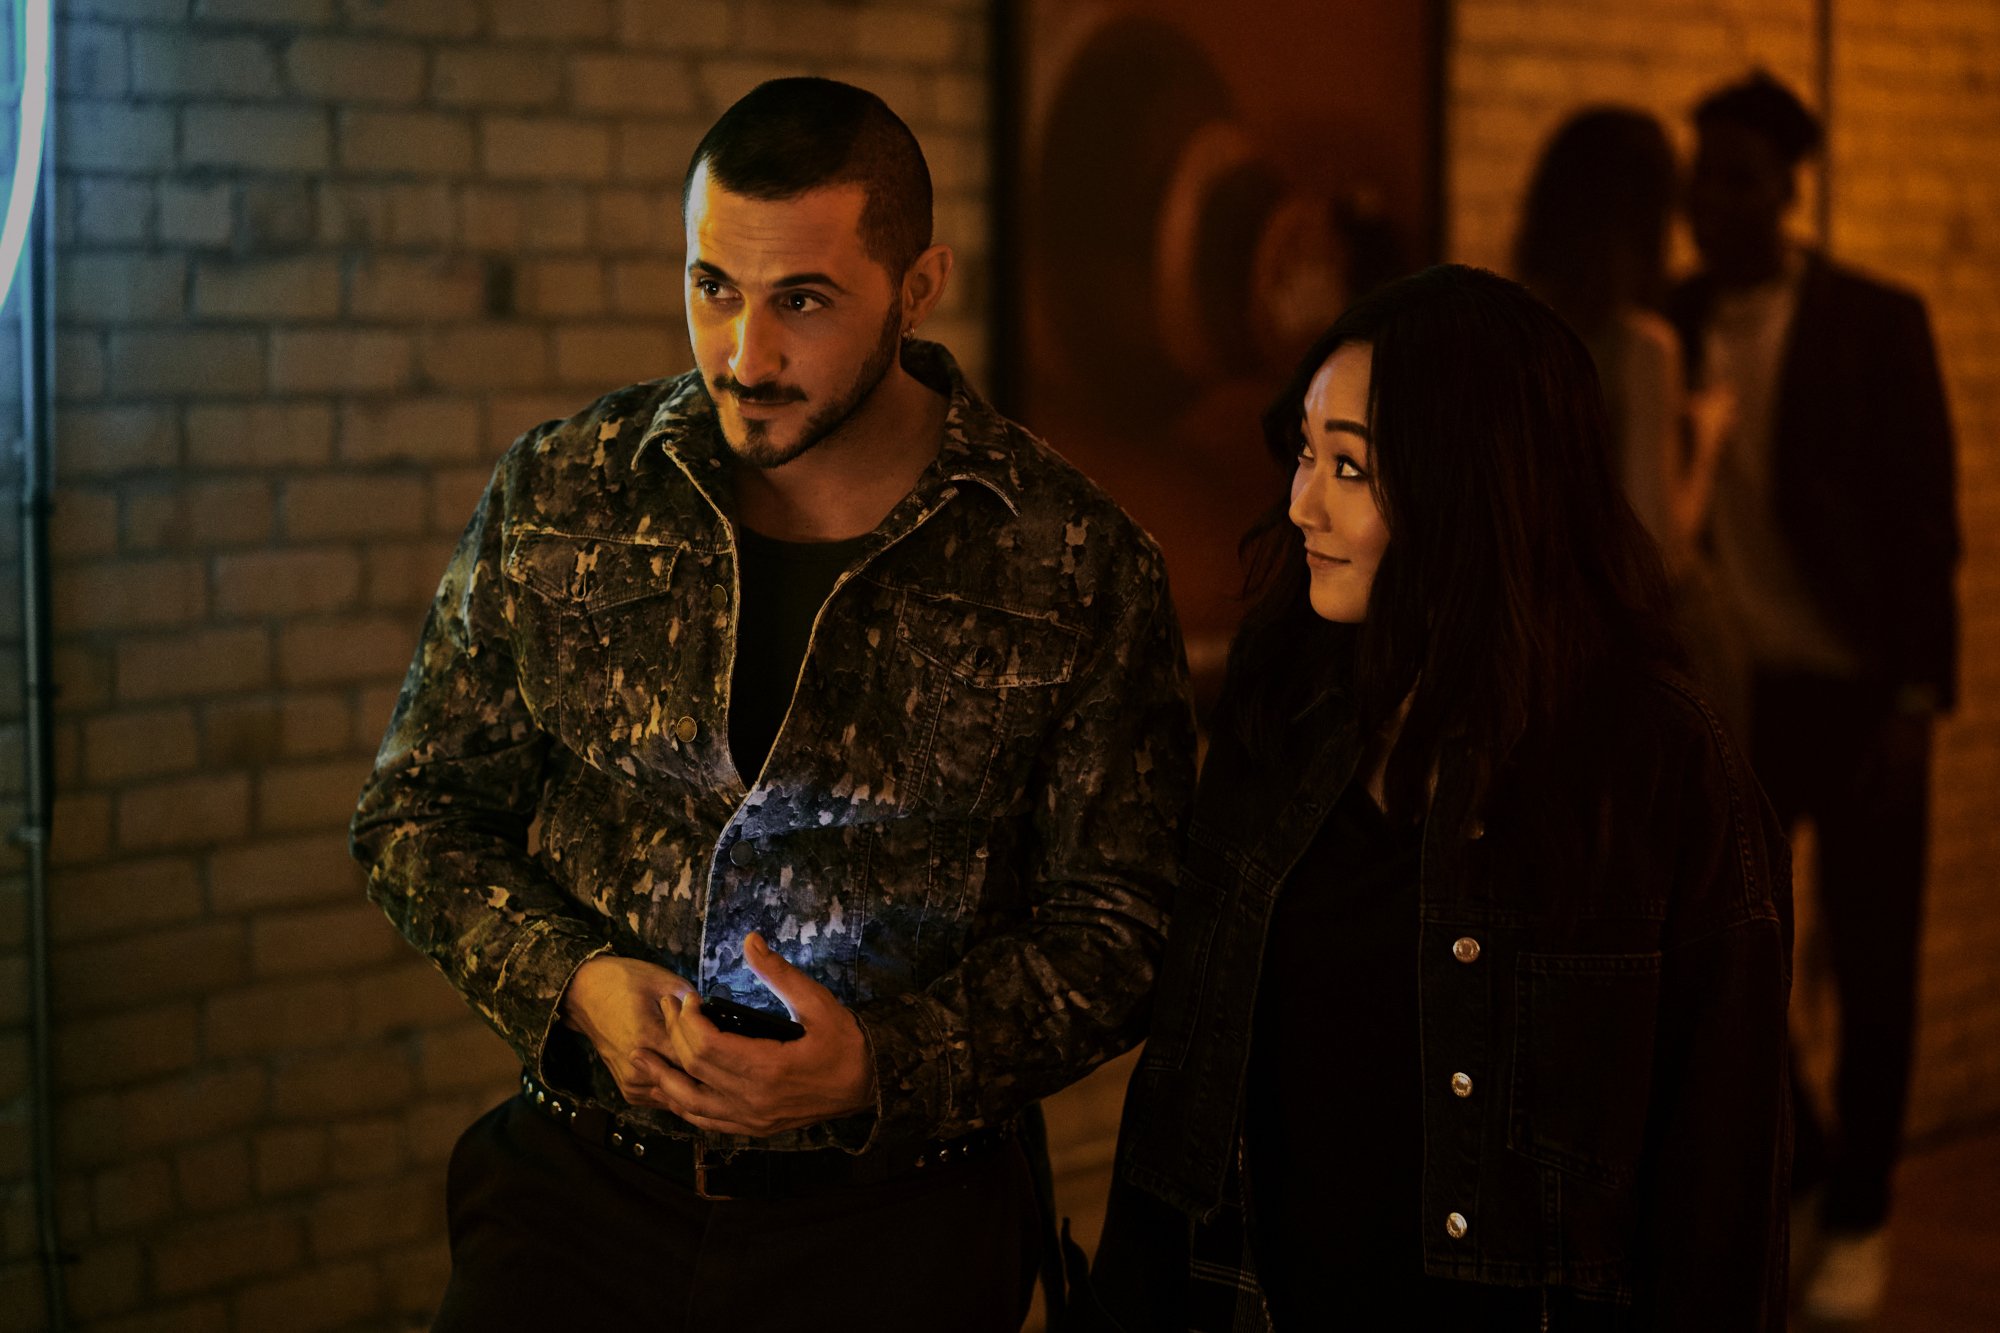 Tomer Capone and Karen Fukuhar in the opening scene of 'The Boys' Season 3. He's holding a jar and looking at something off-screen. She's looking at him and smiling.